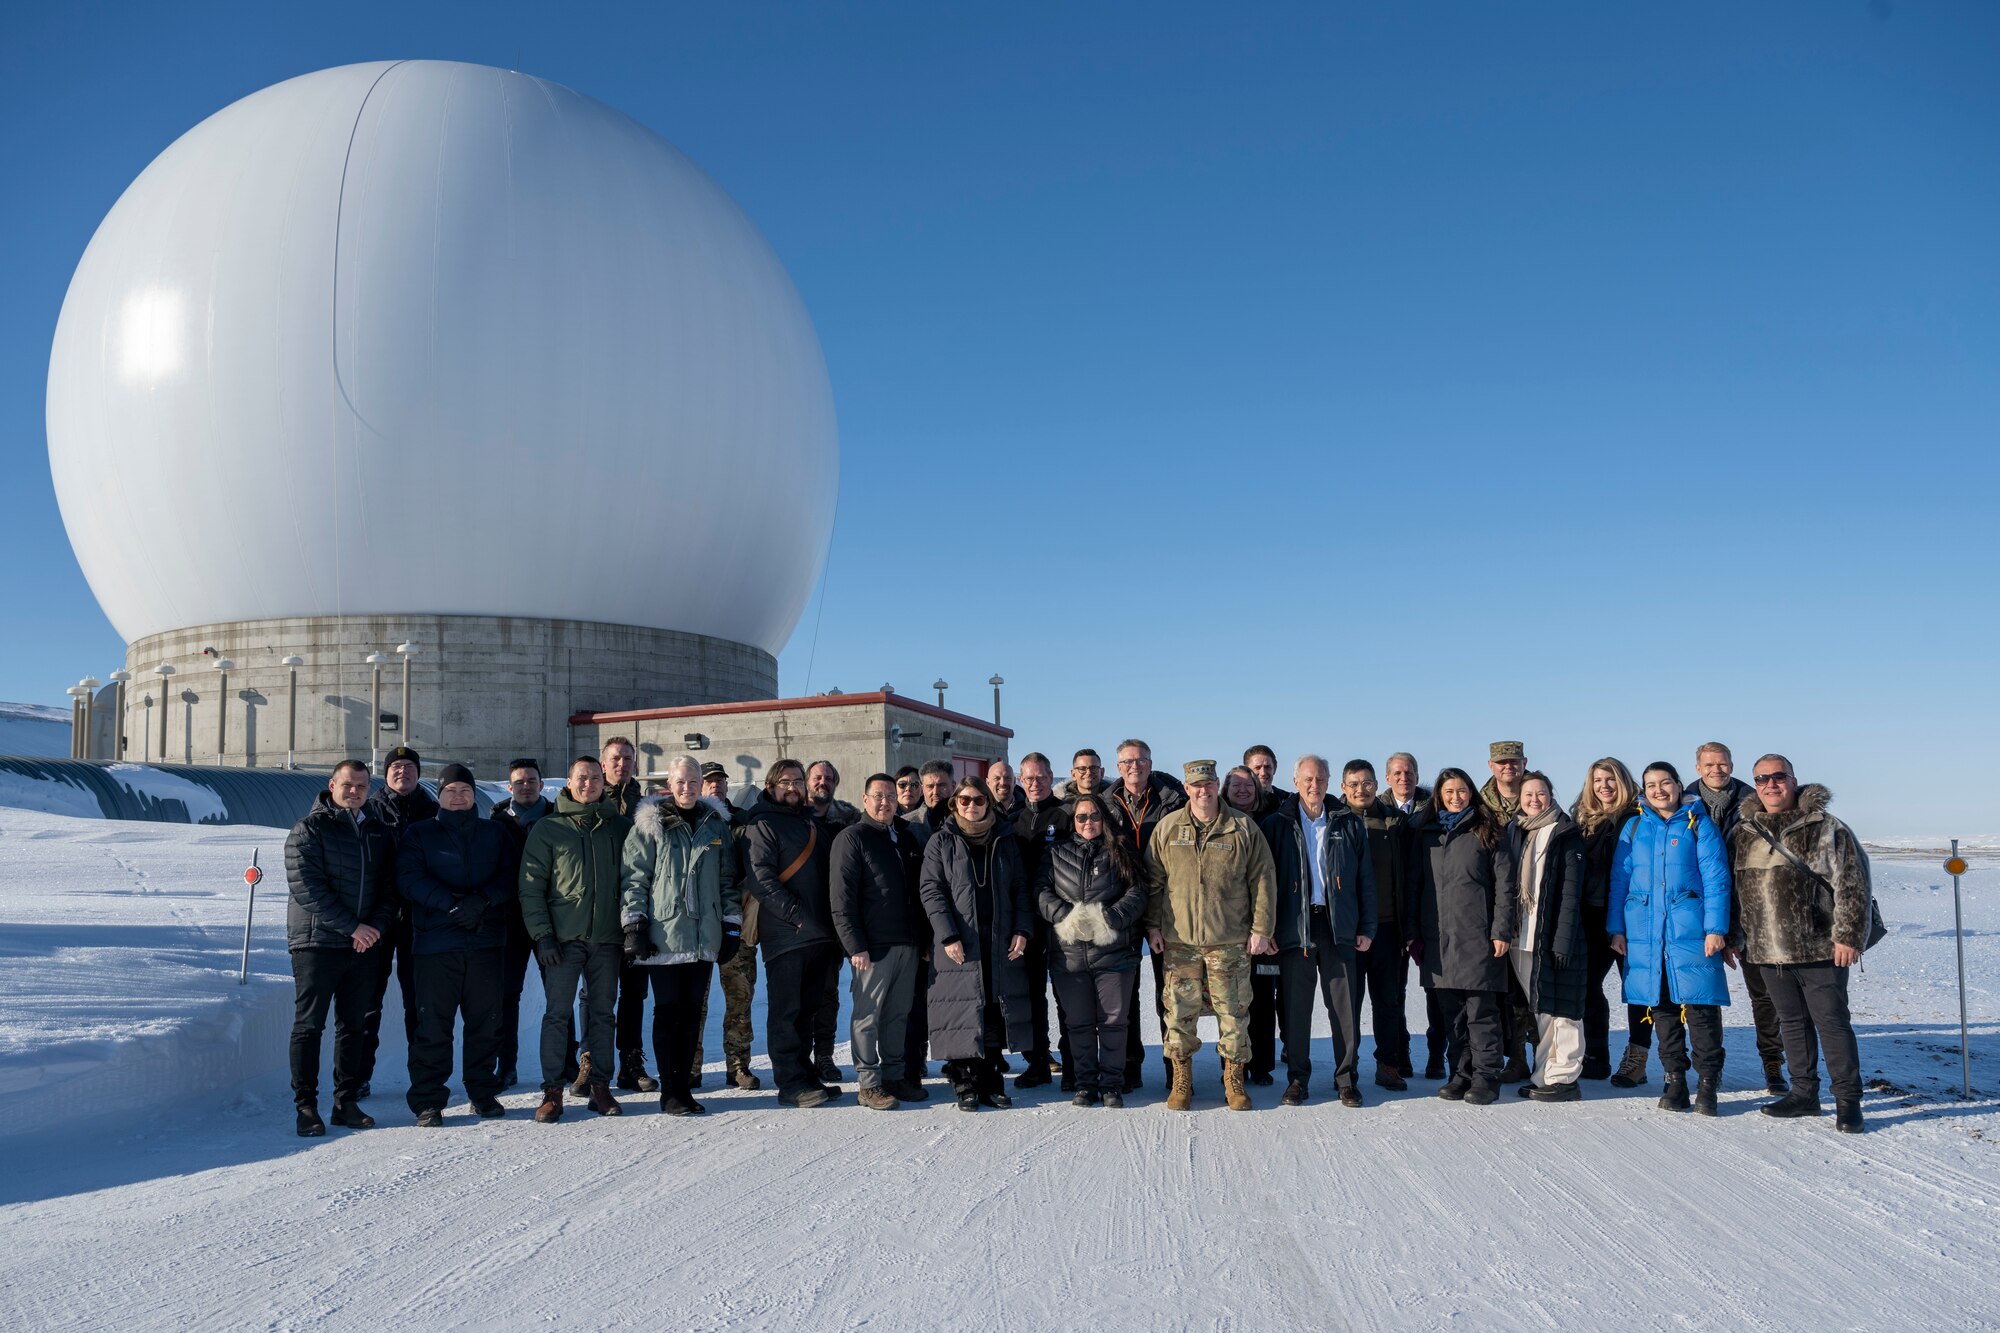 Chief of Space Operations U.S. Space Force Gen. Chance Saltzman and distinguished guests stand in front of a radar dome belonging to the 23rd Space Operations Squadron Detachment 1 at Pituffik Space Base, Greenland, April 5, 2023. Det. 1 falls under Space Delta 6 - Space Access and Cyberspace Operations. The Det. 1 mission is to provide telemetry, tracking and commanding operations to the U.S. and allied government satellite programs. (U.S. Space Force photo by Senior Airman Kaitlin Castillo)